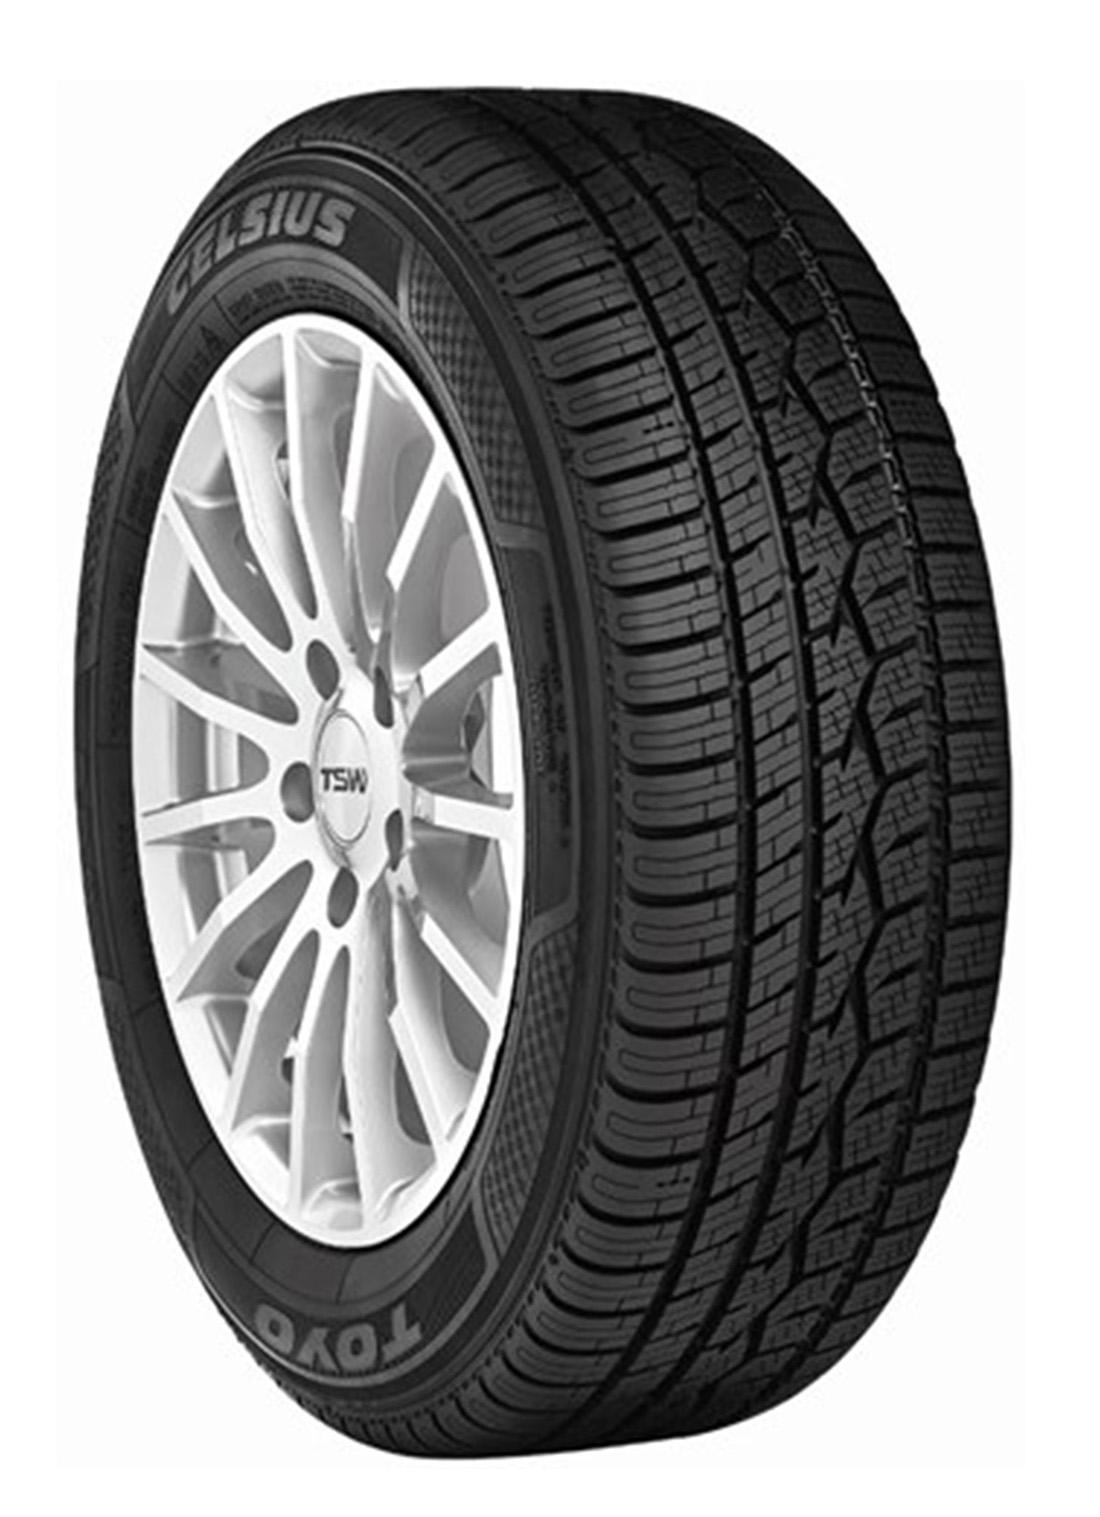 Toyo - CELSIUS HTS  NW  255/55R18